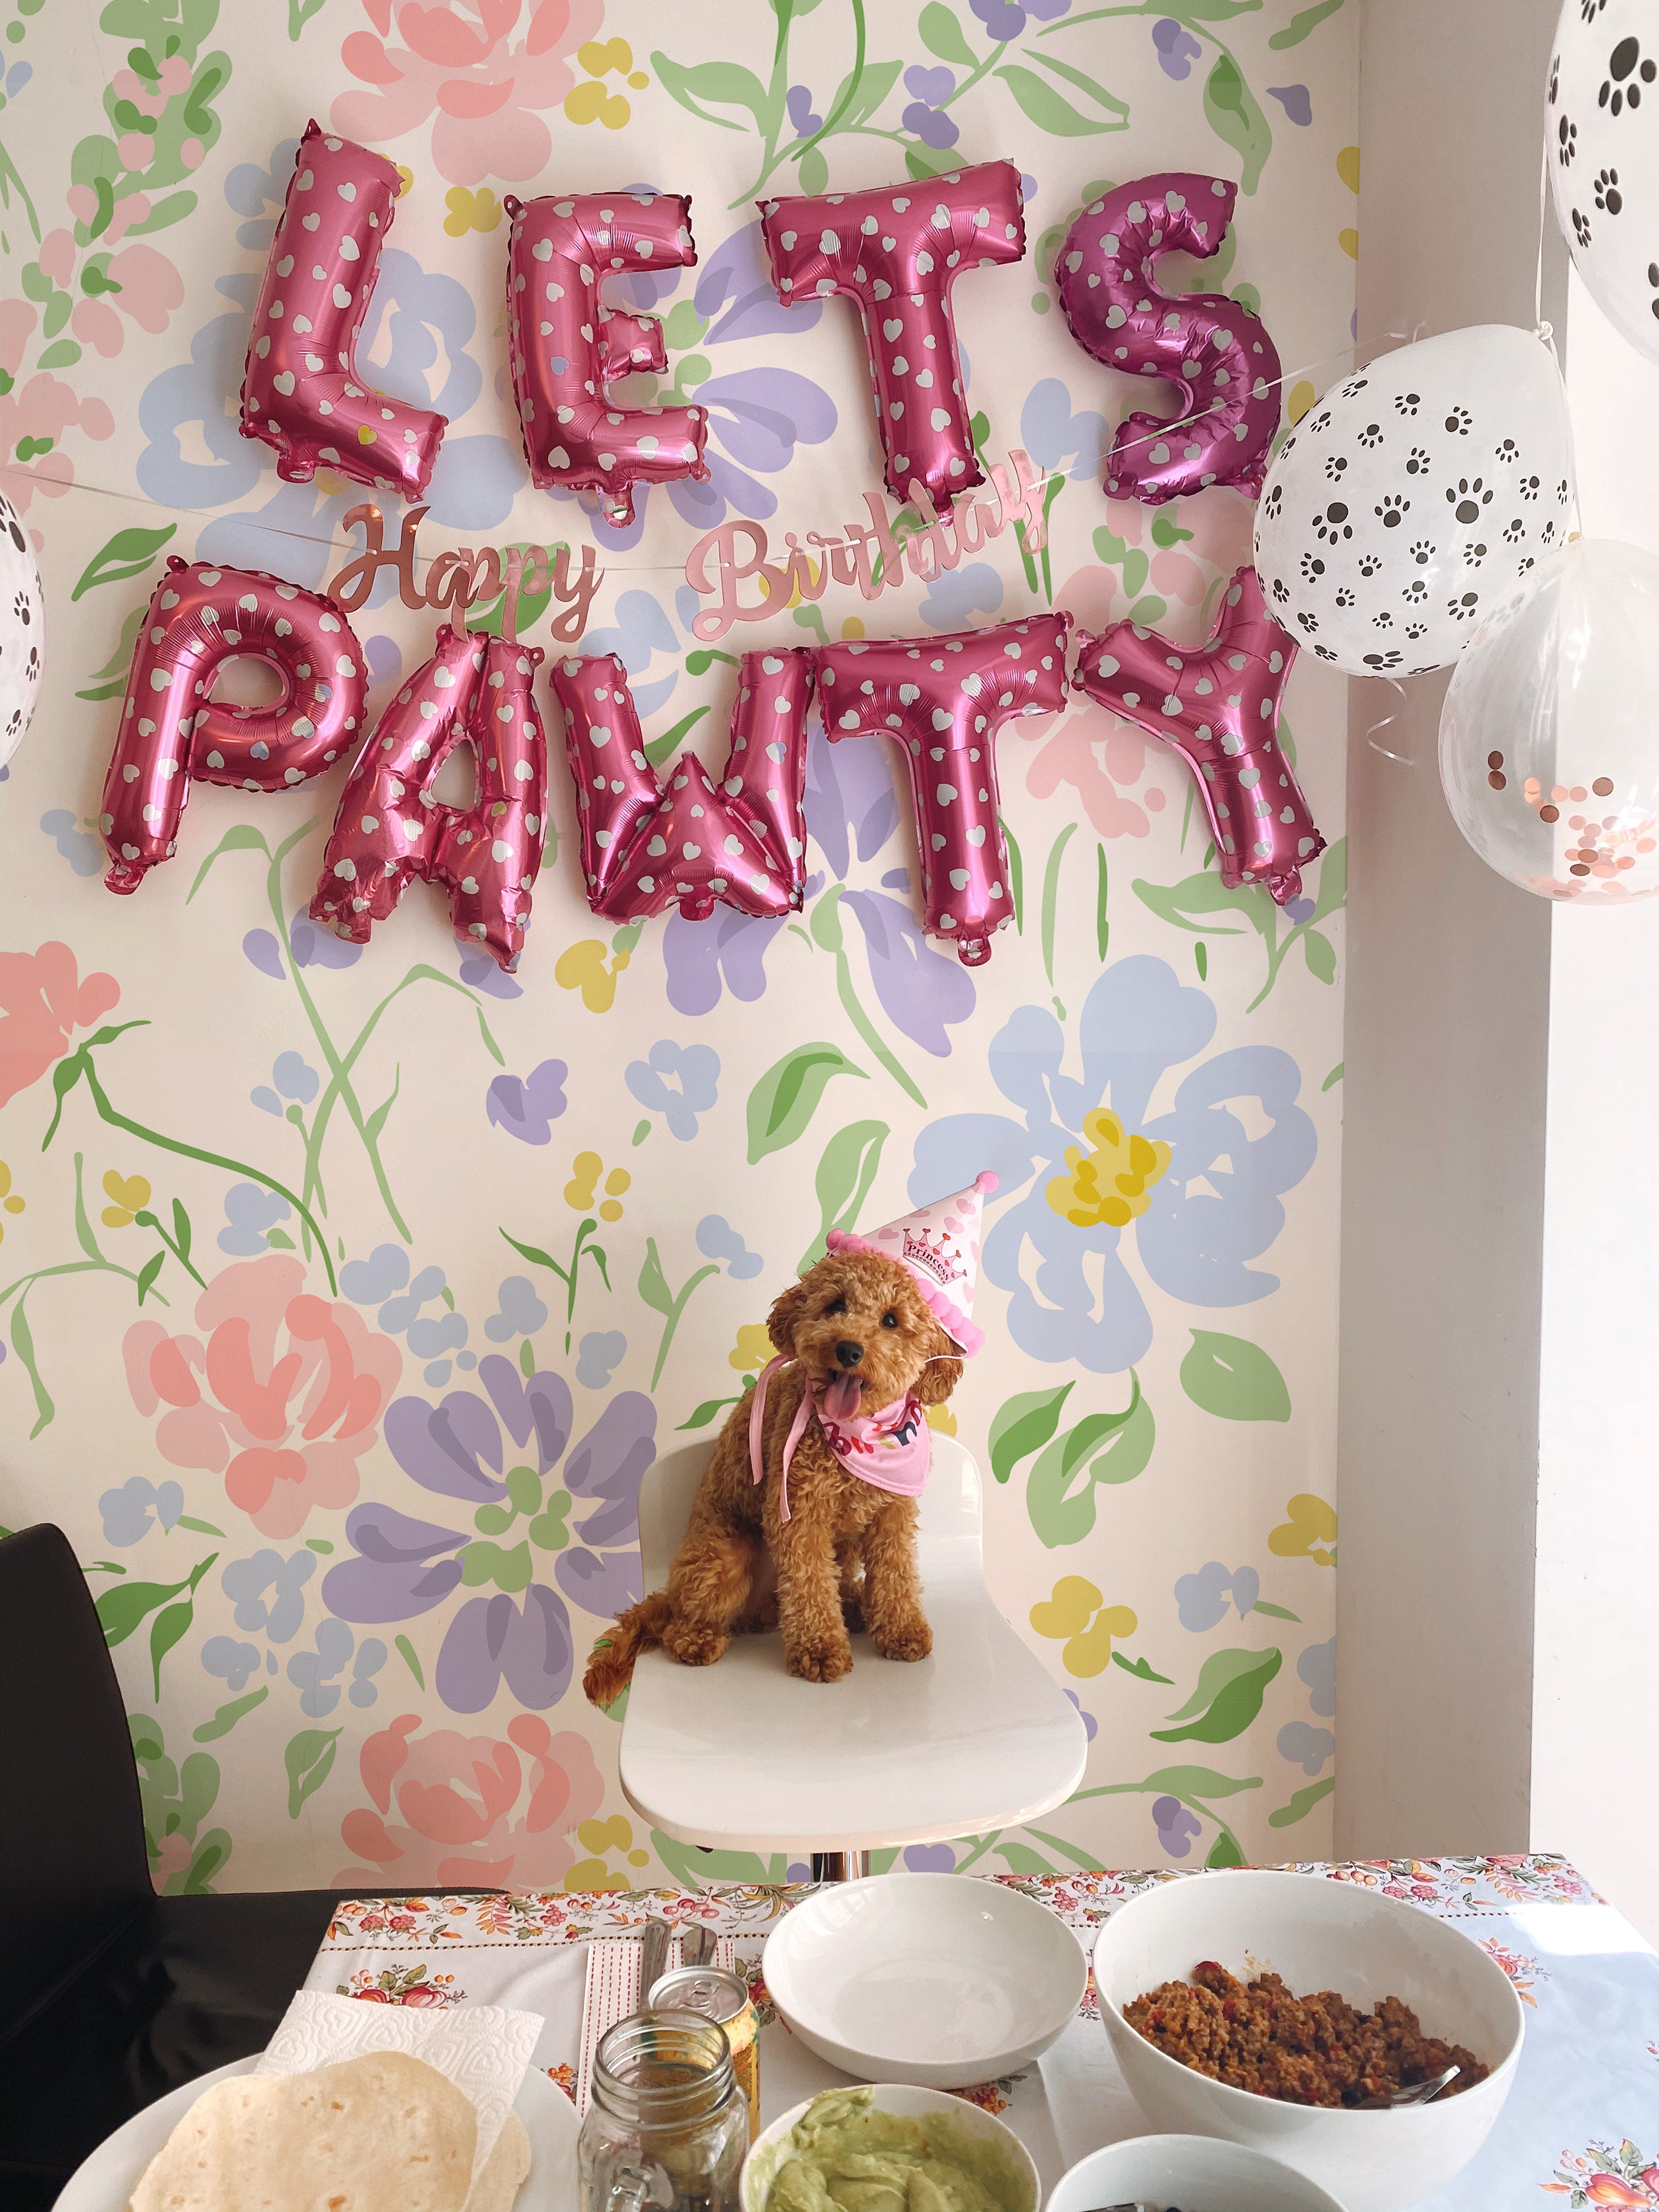 A festive birthday setting for a dog named 'Pawty' with colorful balloons spelling 'Let's Pawty Happy Birthday' against a backdrop of Romana Wallpaper. The wallpaper features a cheerful floral pattern in pastel shades of pink, blue, and yellow.